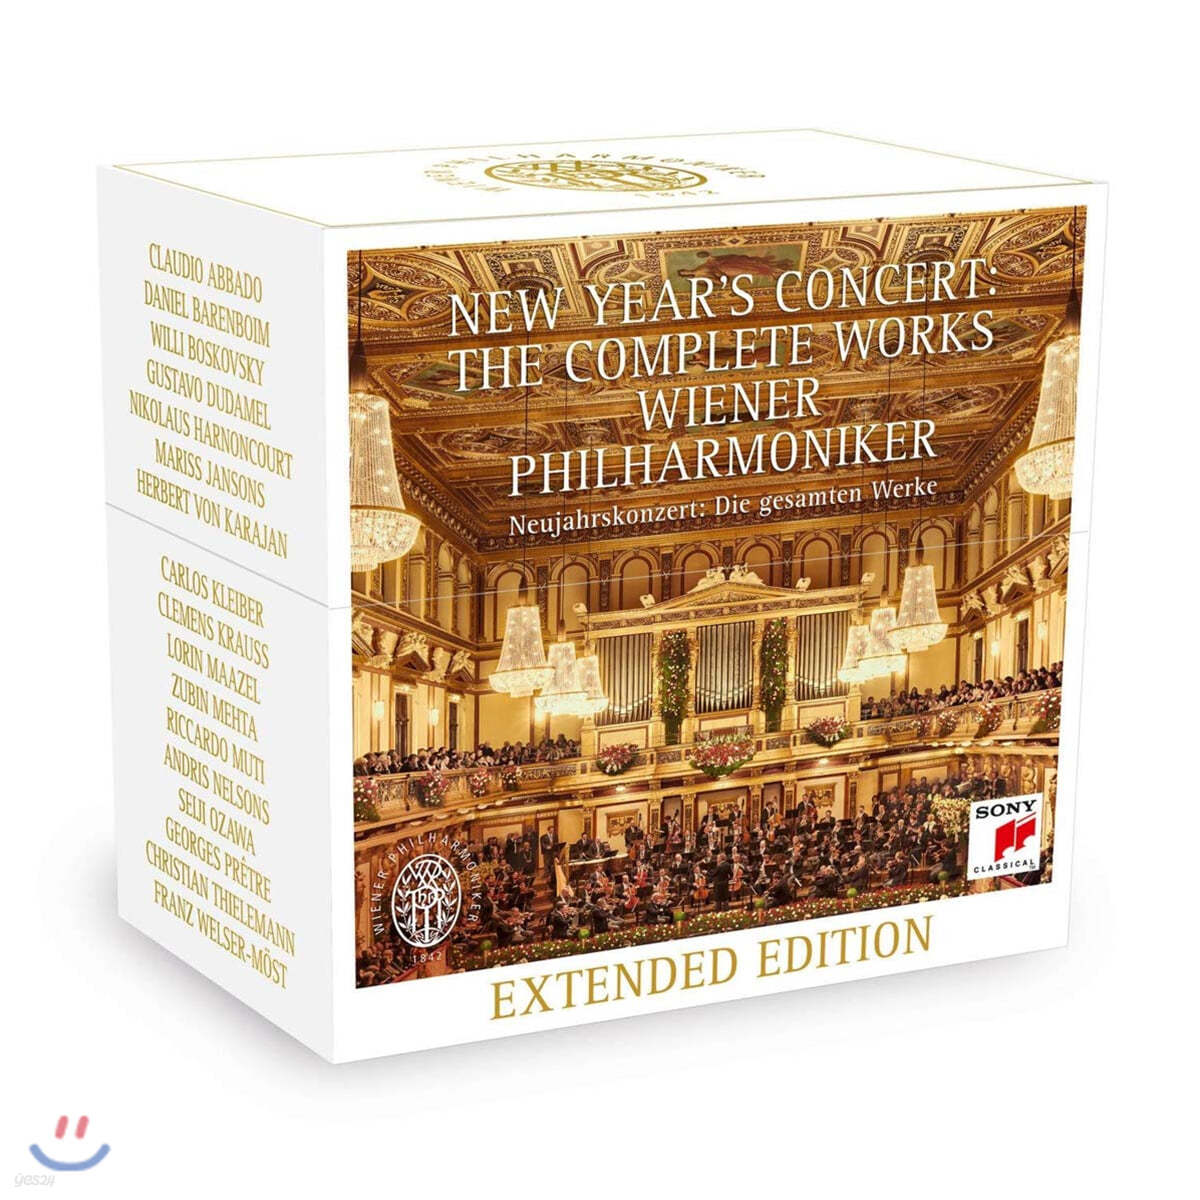 Wiener Philharmoniker 신년 음악회 (New Year&#39;s Concert: The Complete Works) 